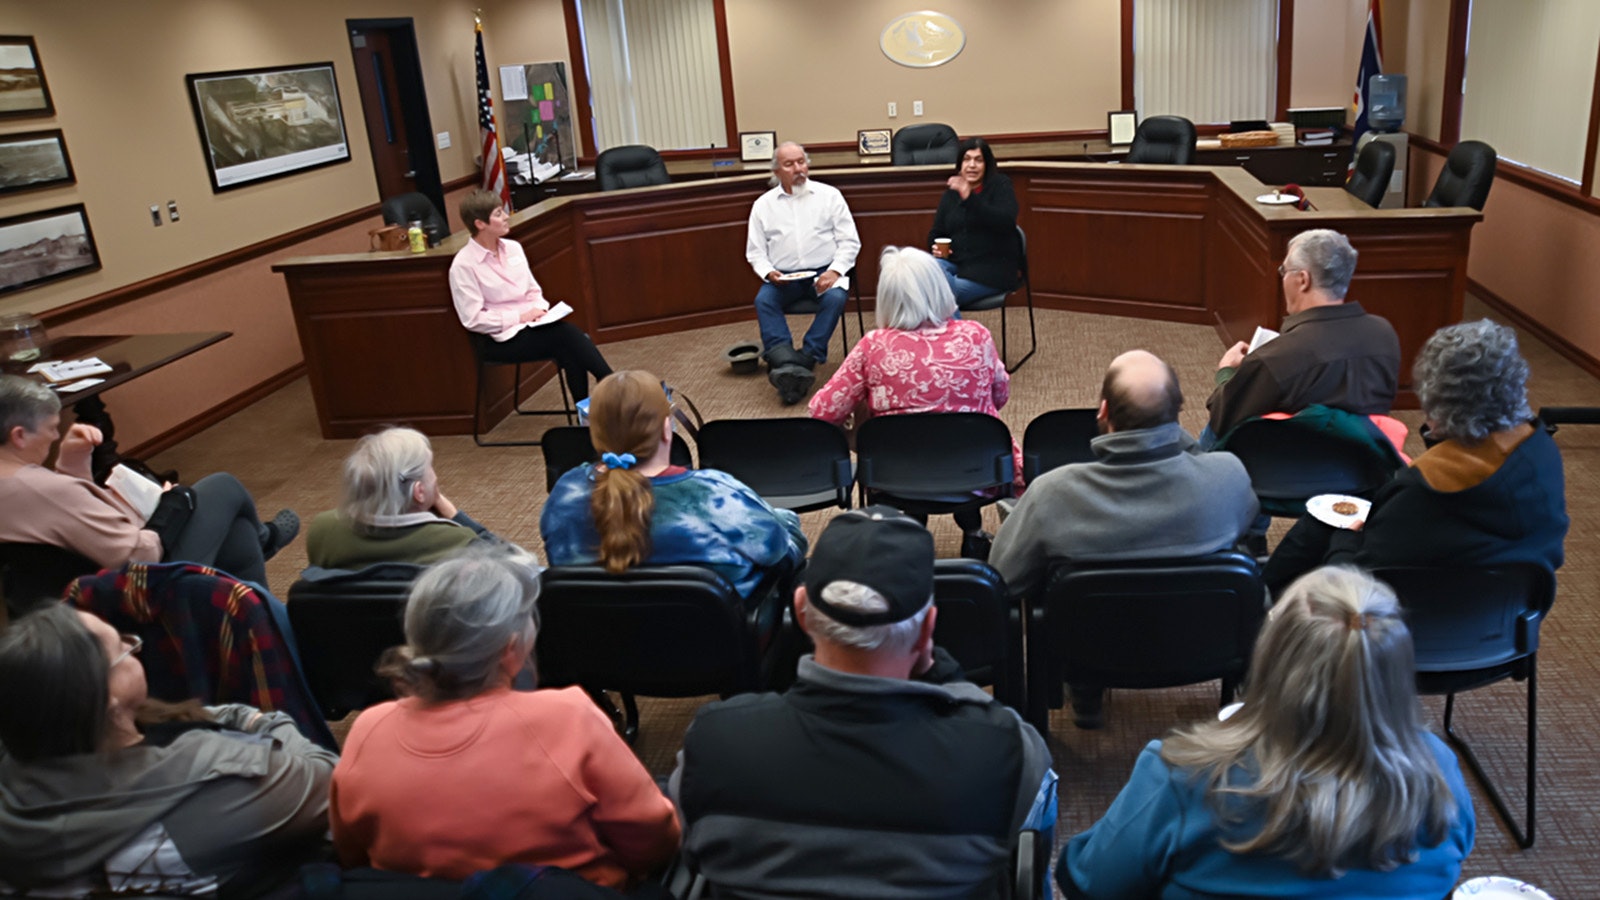 Democrats Sergio Maldonado and former state Rep. Andi LeBeau Clifford were the featured speakers for a political discussion attended by Hot Springs County Democrats and Republicans.